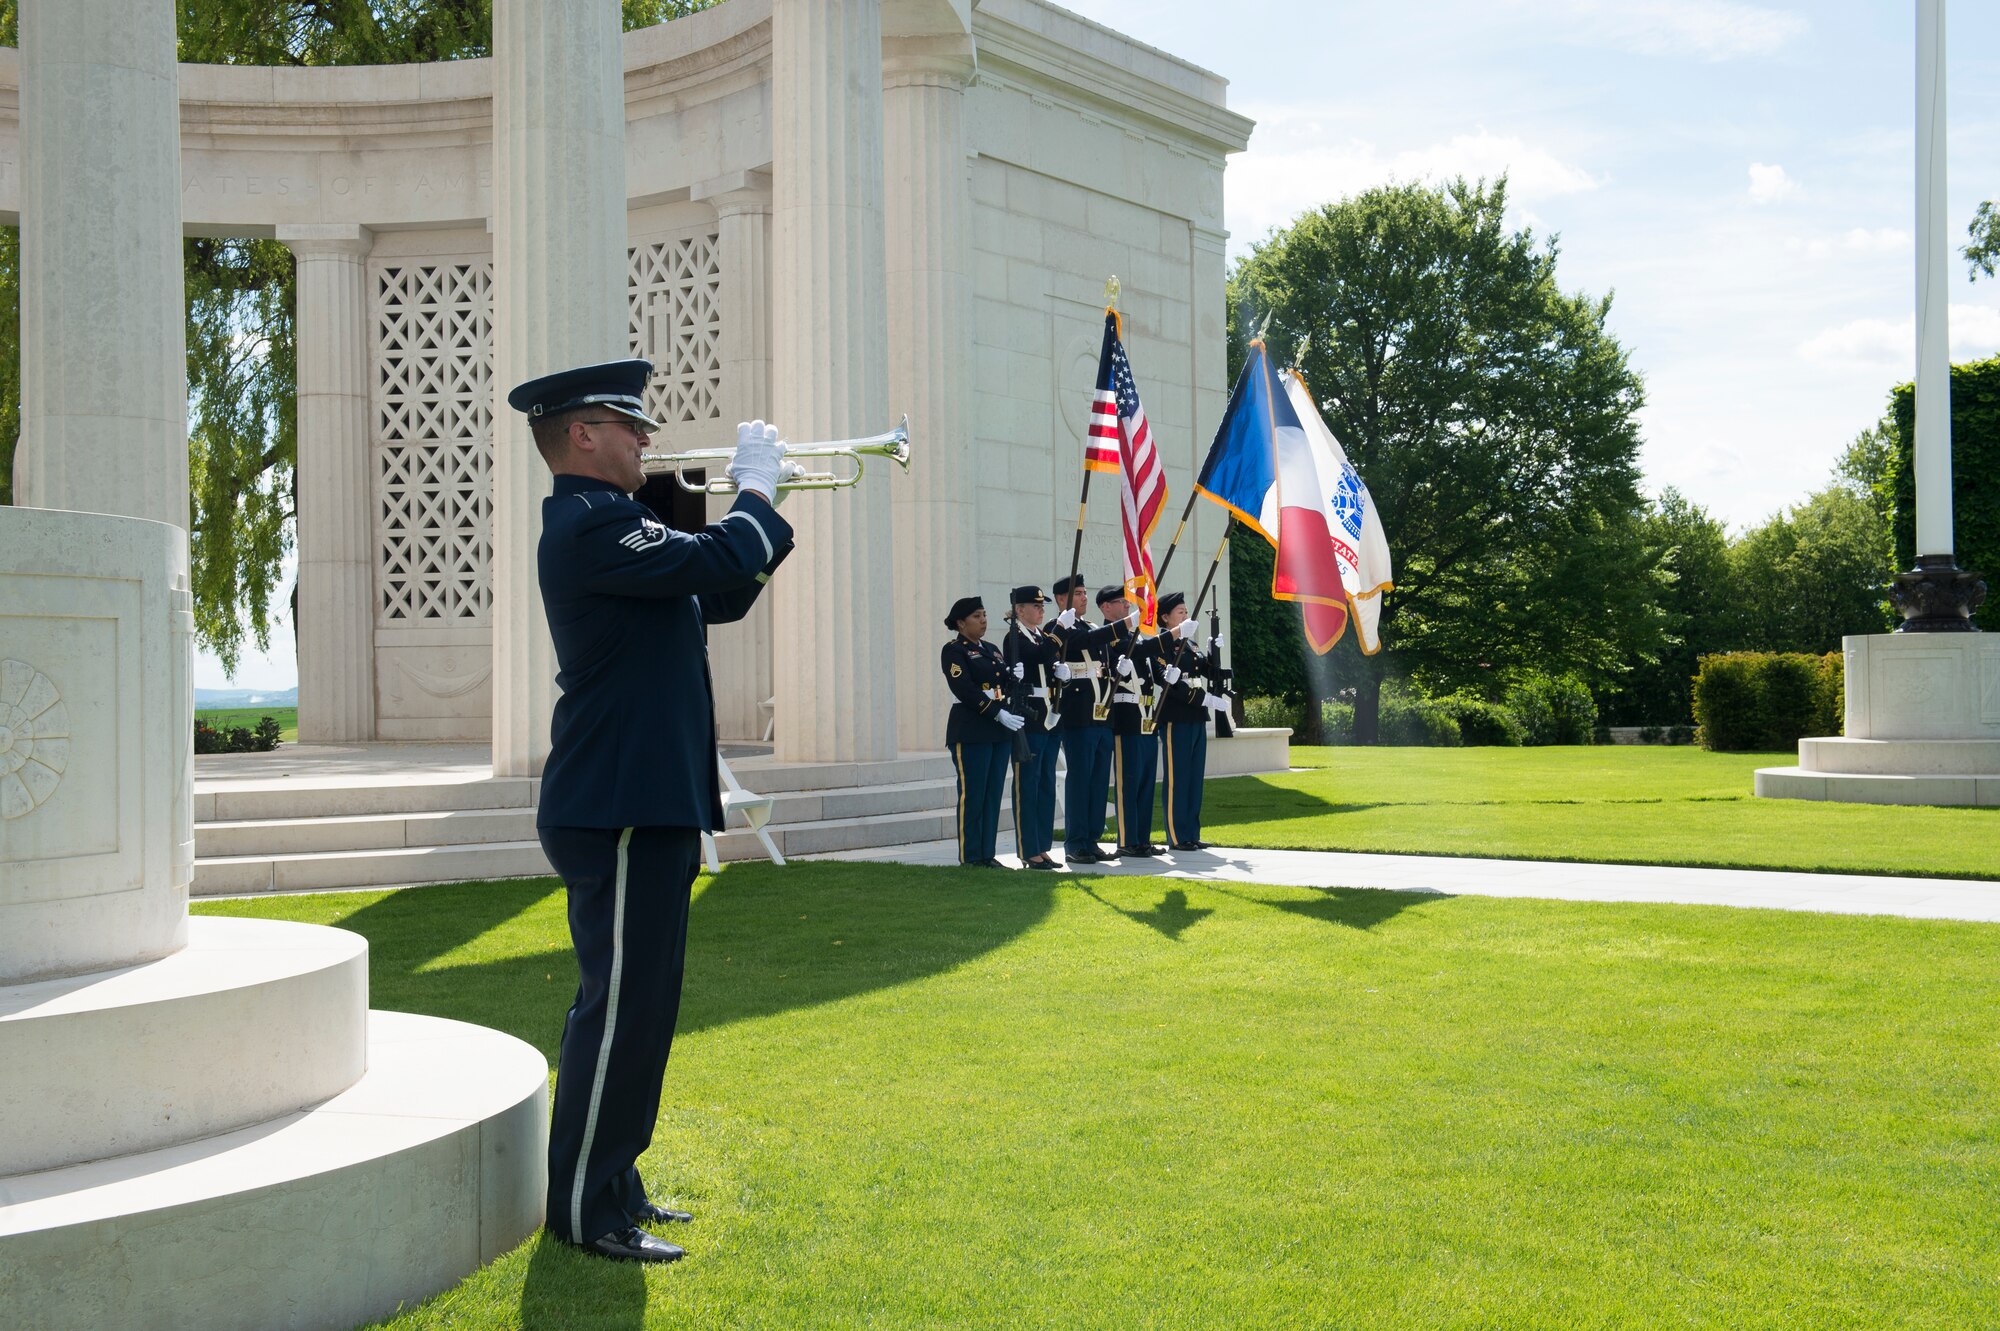 U.S. Air Force Staff Sgt. Nicholas Del Villano, U.S. Air Forces in Europe Jazz Band trumpeter, play taps on a bugle during a Memorial Day ceremony at the Saint-Mihiel American Cemetery, Thiaucourt-Regniéville, France, May 26, 2019. The ceremony at Saint-Mihiel American Cemetery recognized both the Americans and the French service members who perished in combat. (U.S. Air Force photo by Staff Sgt. Jonathan Bass)